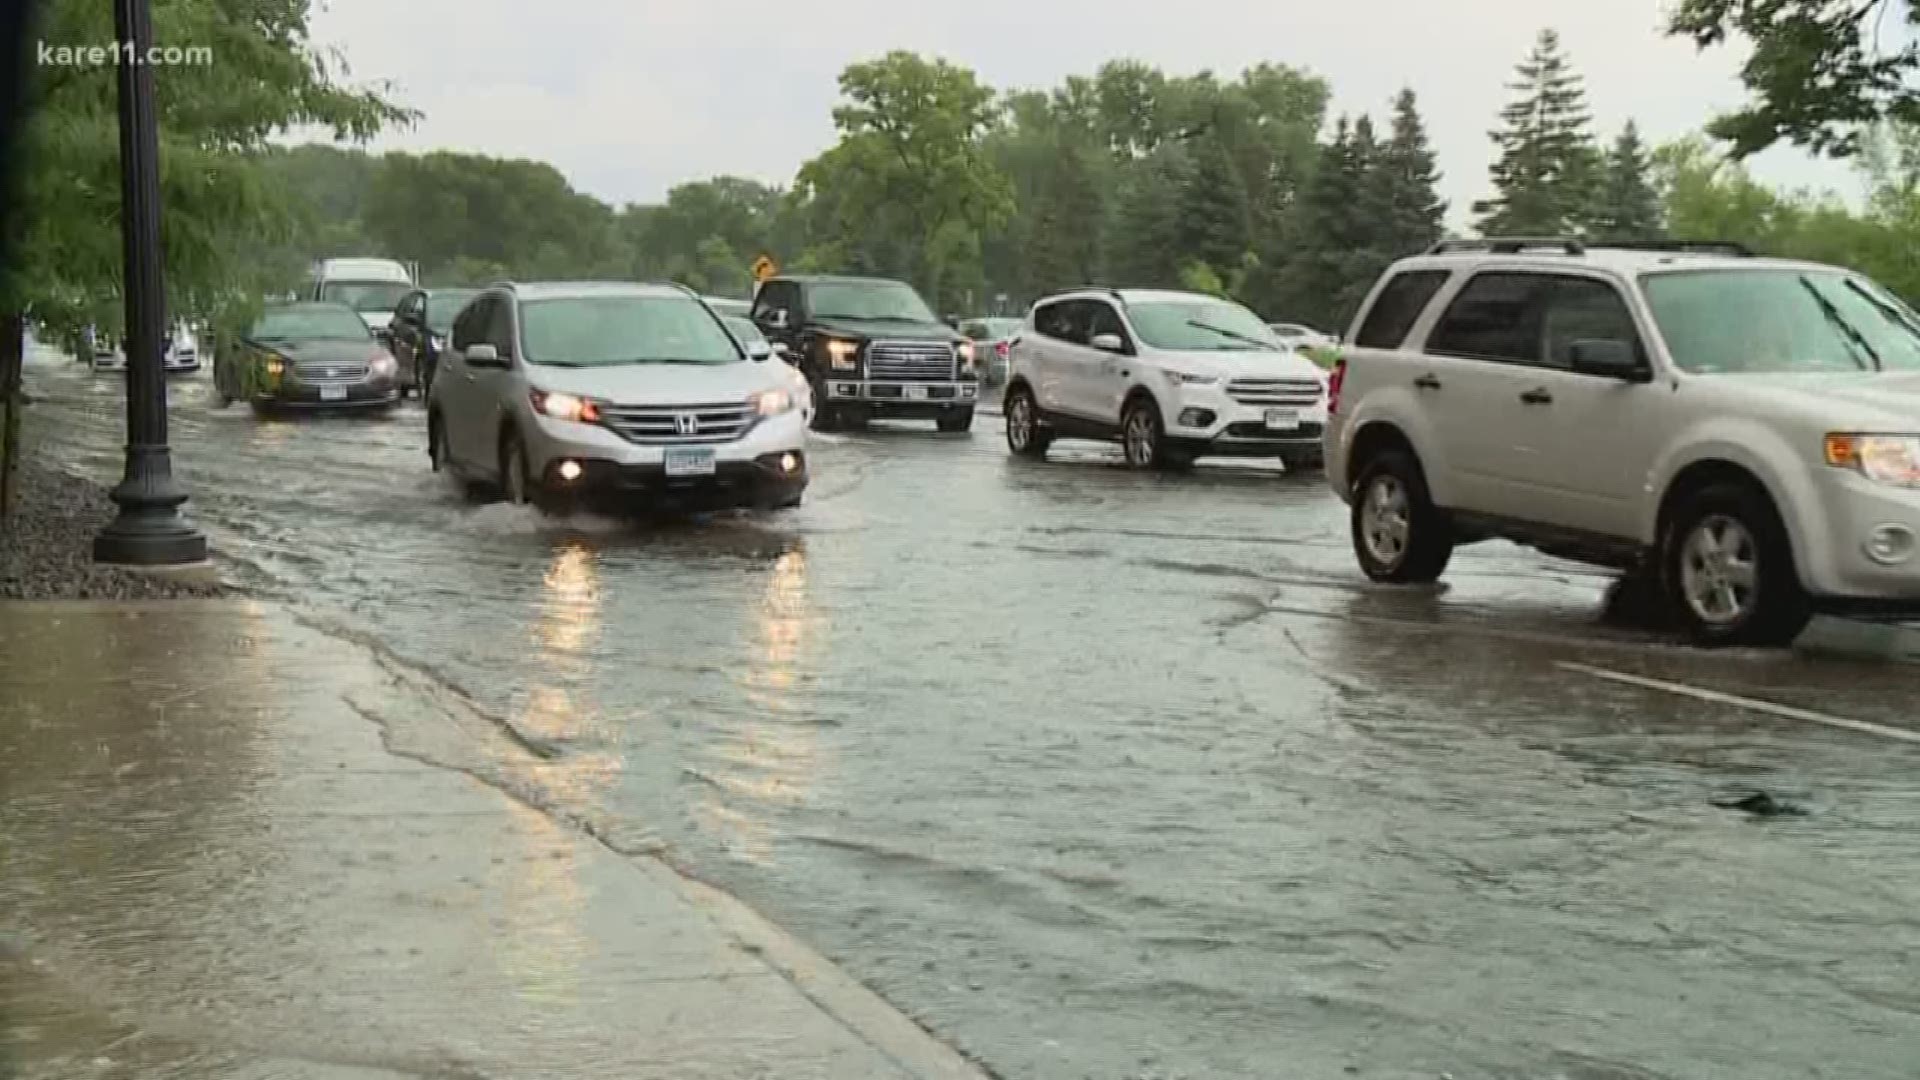 On Tuesday, about two inches of rain fell in Minneapolis in just 90 minutes, causing flash flooding in neighborhoods across the city.